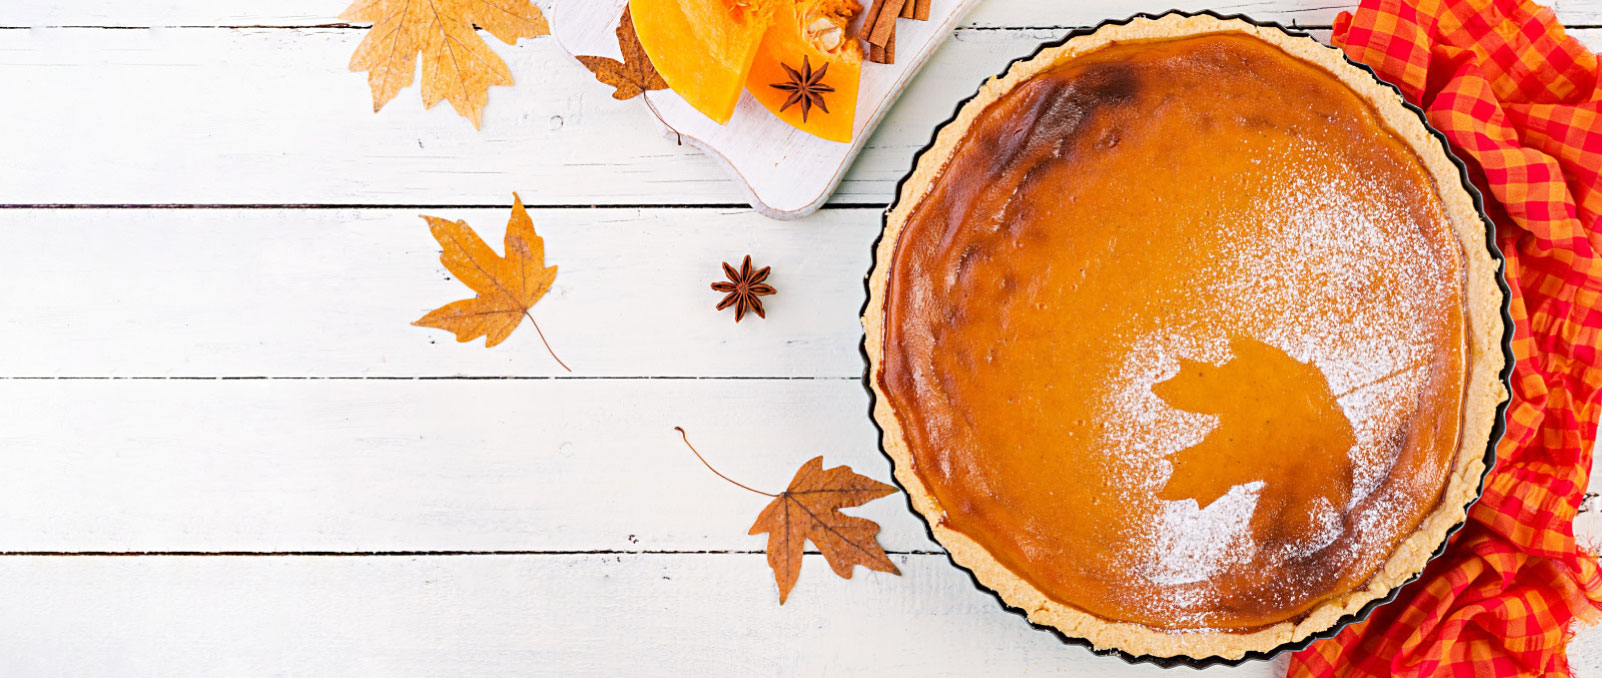 pumpkin pie with leaves, thanksgiving concept